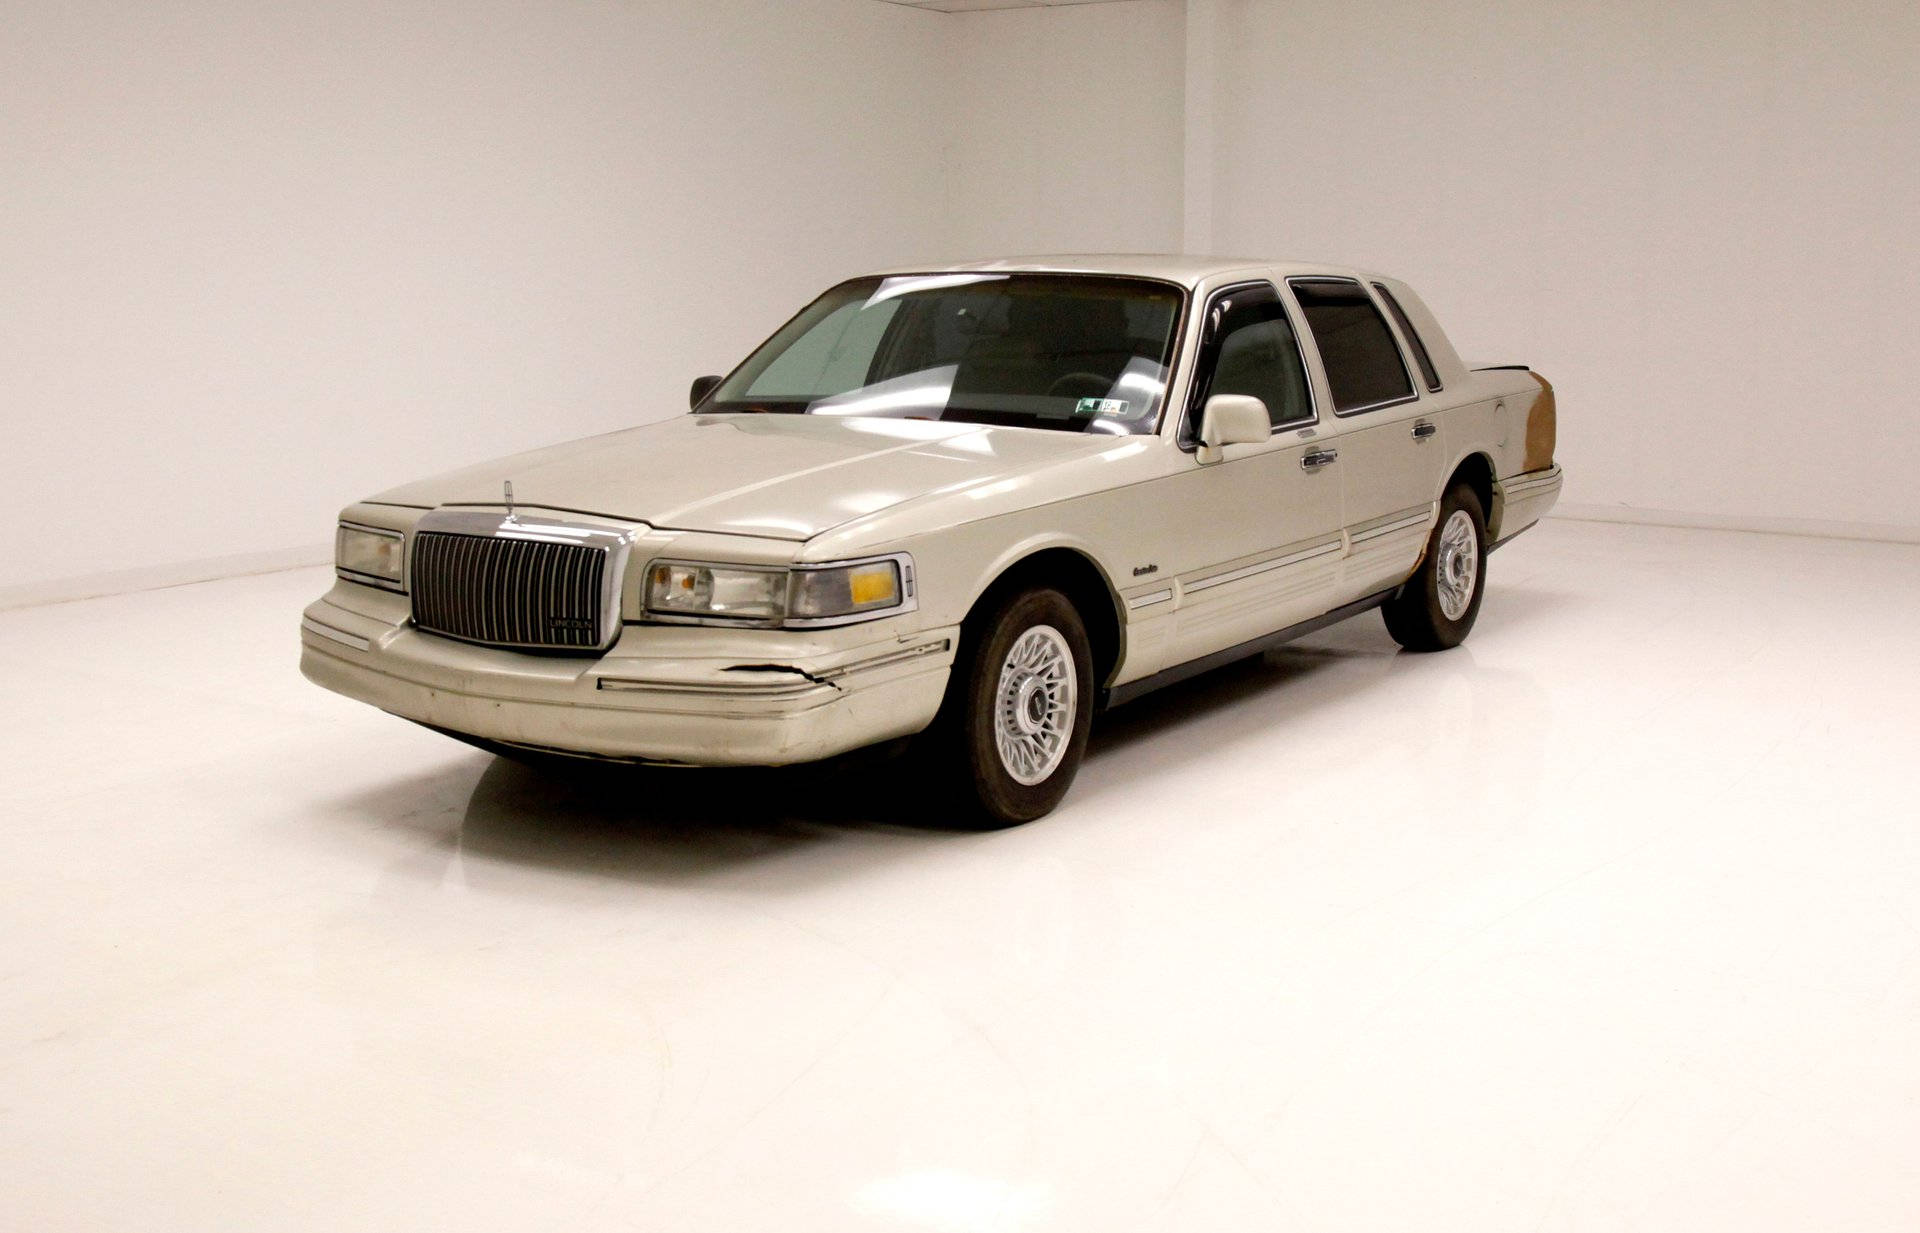 Classic 1996 Town Lincoln Car in All Its Glory Wallpaper